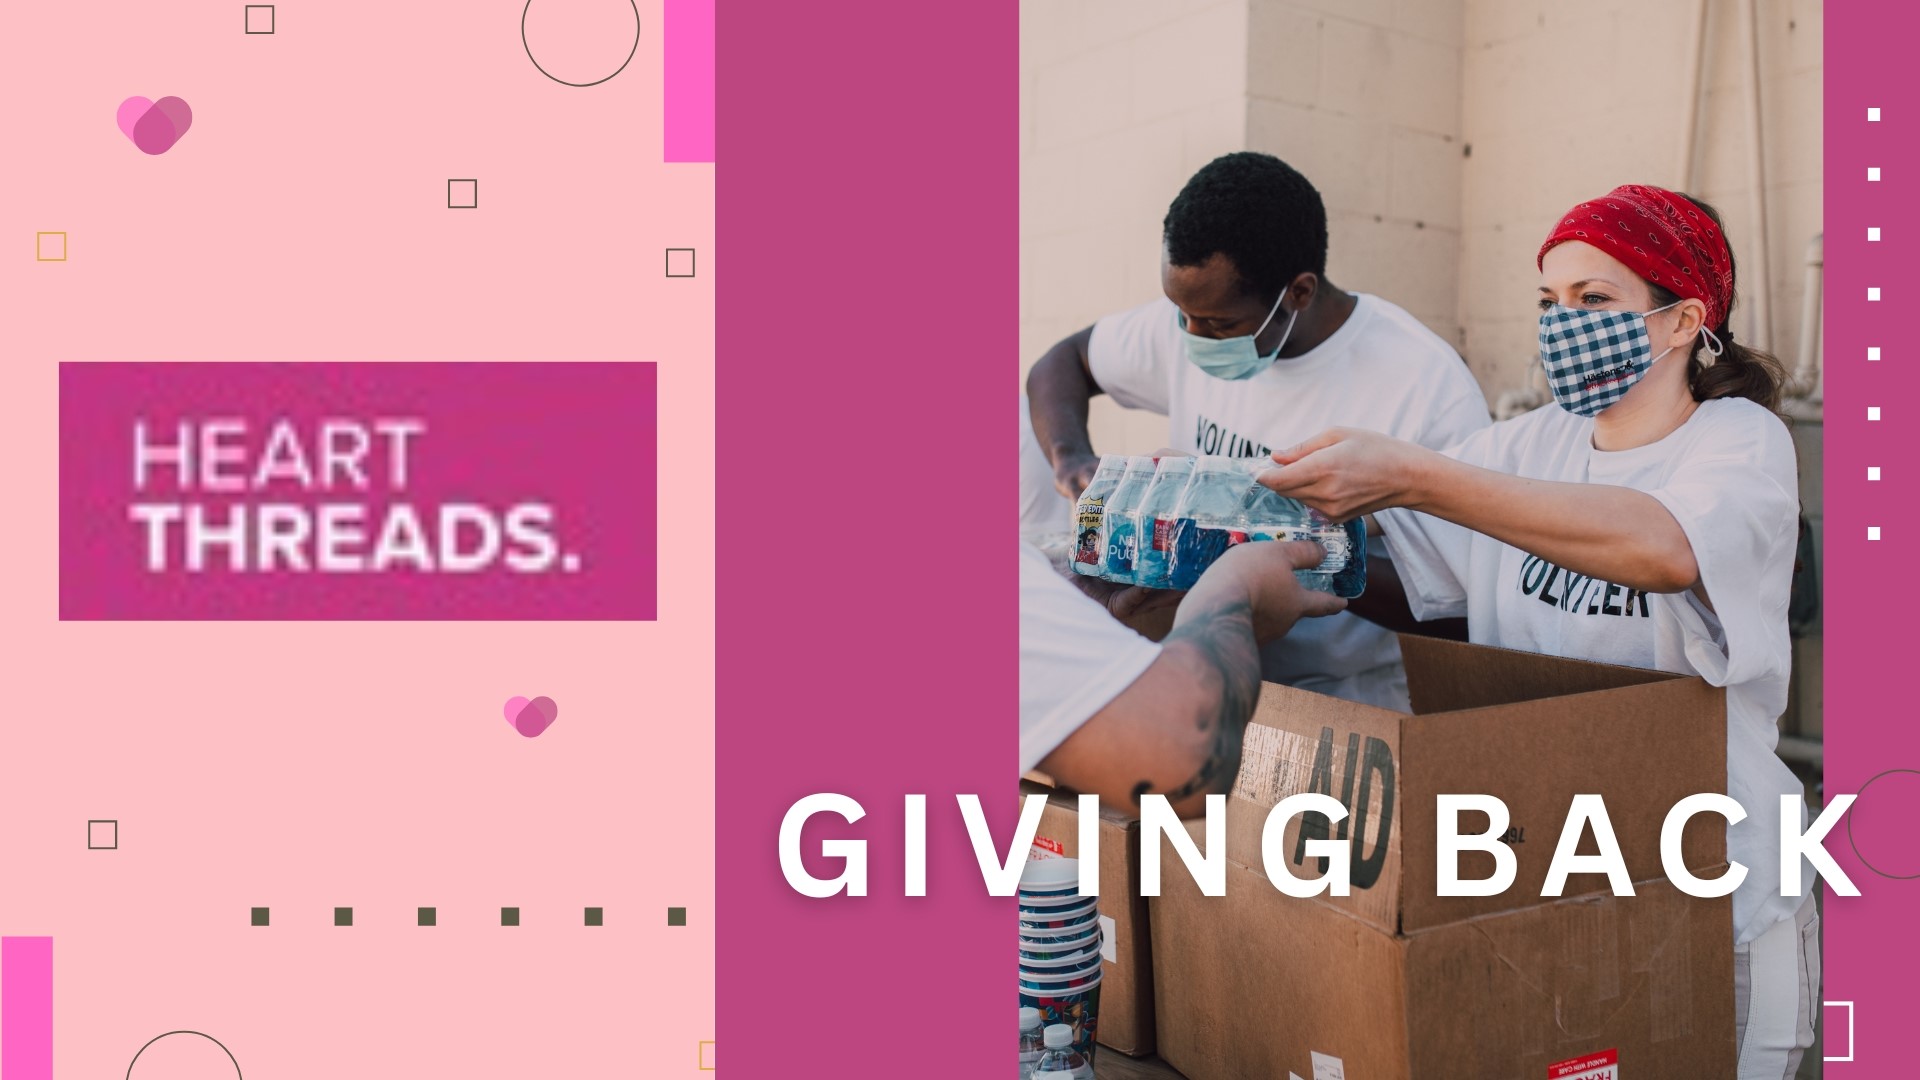 A collection of stories showcasing those giving to others during this holiday season.